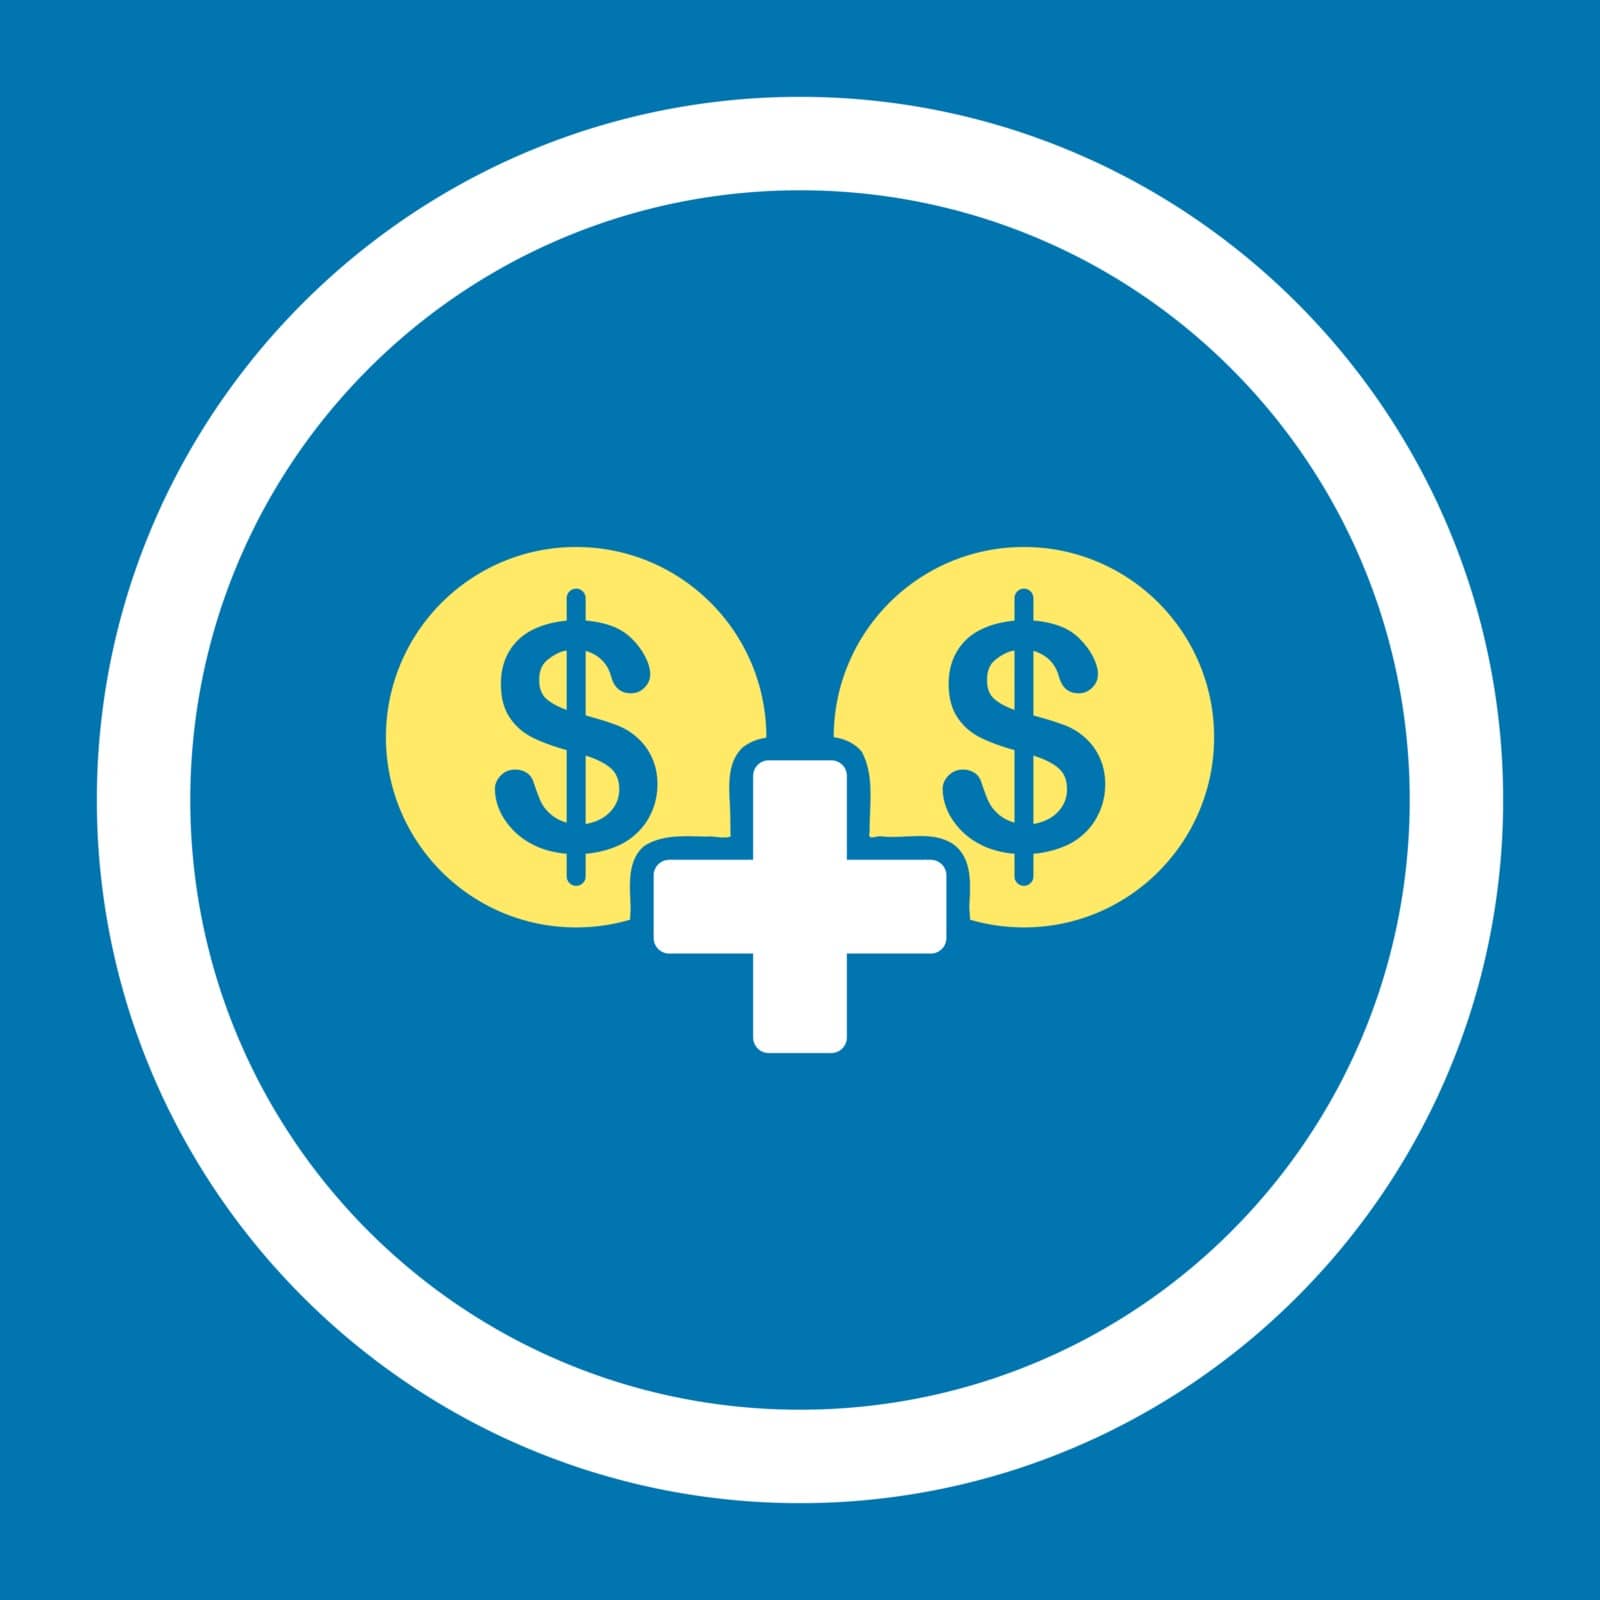 Sum vector icon. This flat rounded symbol uses yellow and white colors and isolated on a blue background.